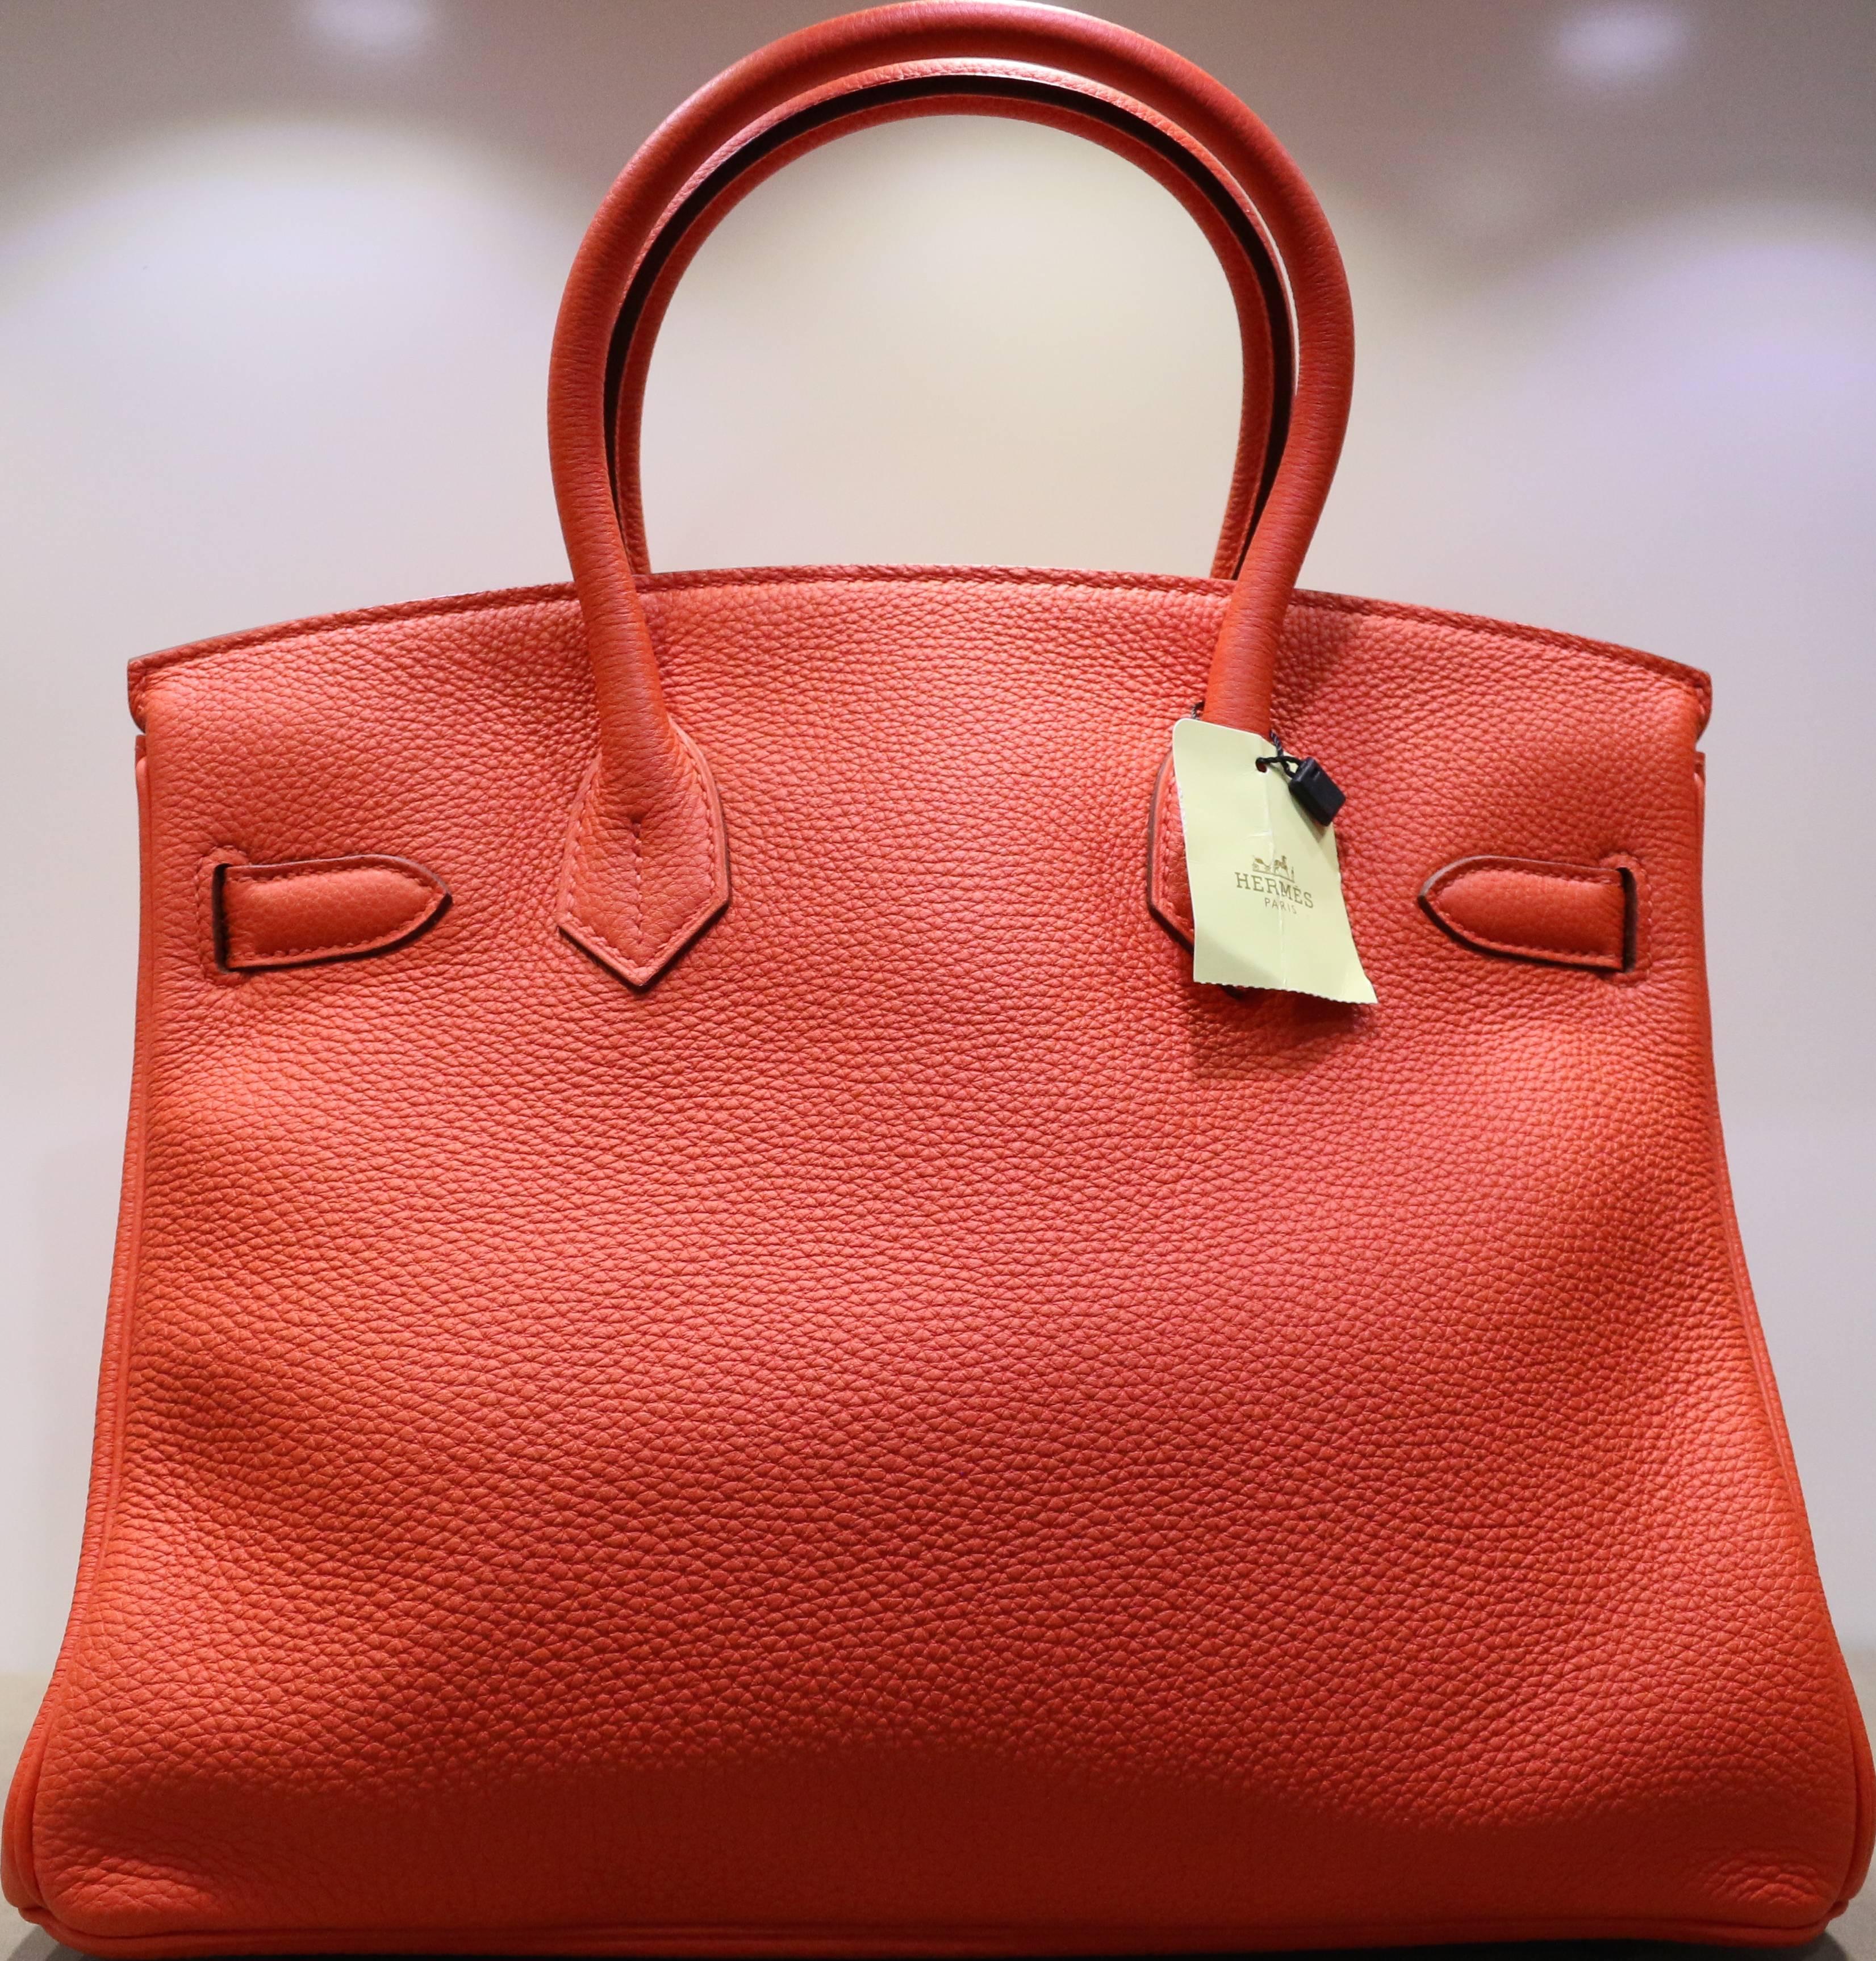 - This pristine, hard to get and never been used Hermes Birkin bag in red togo, 30cm includes padlock, keys, clotted, dust bag and box. Featuring in silver hardware accents. 

- Made in France. 

- Measurement: 23cmH x 30cmW x 17cmD. 